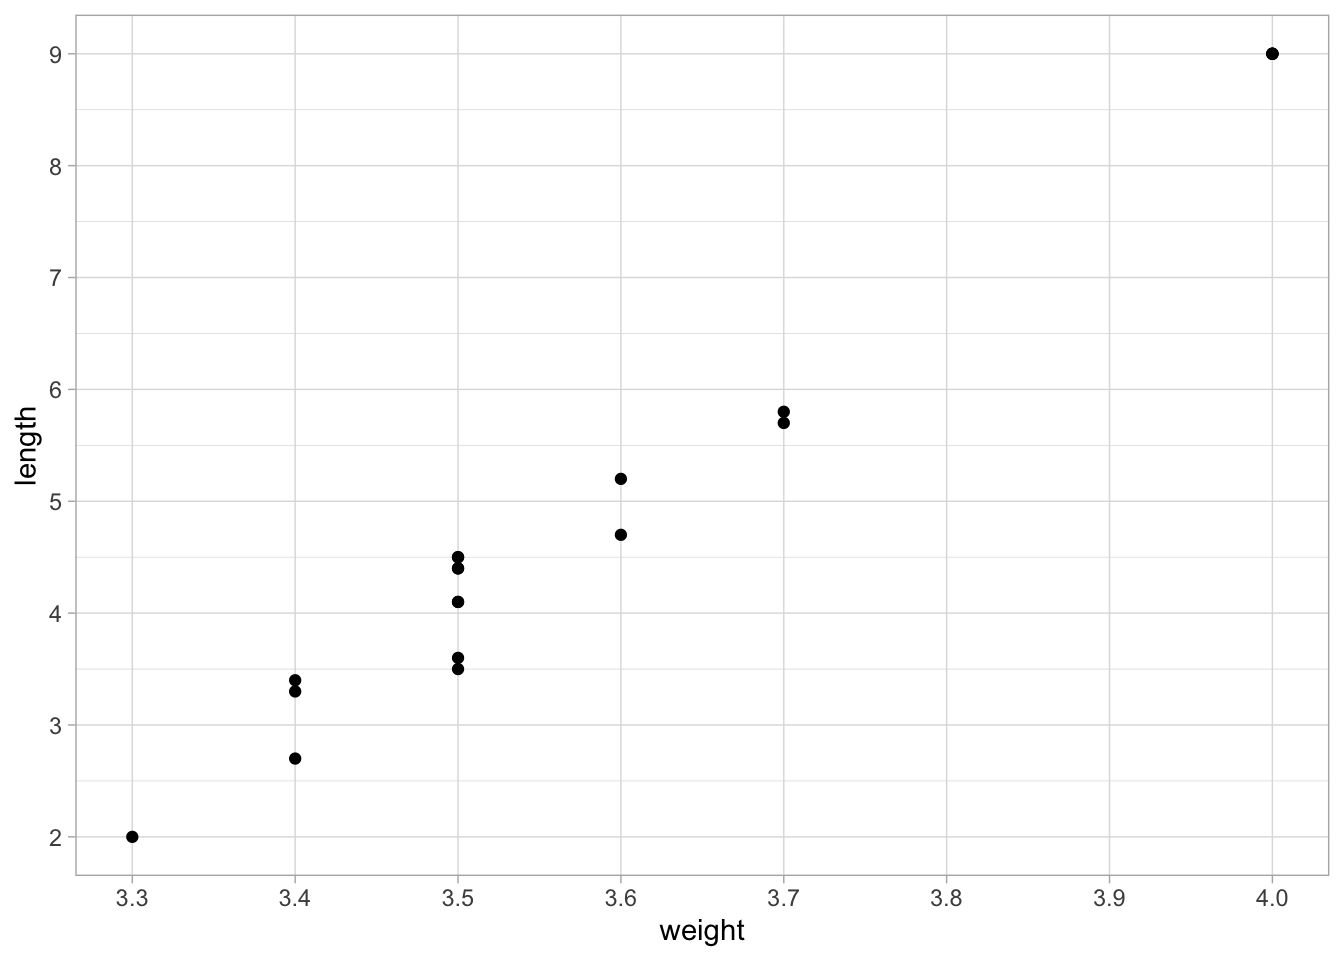 A scatter plot of length and weight.